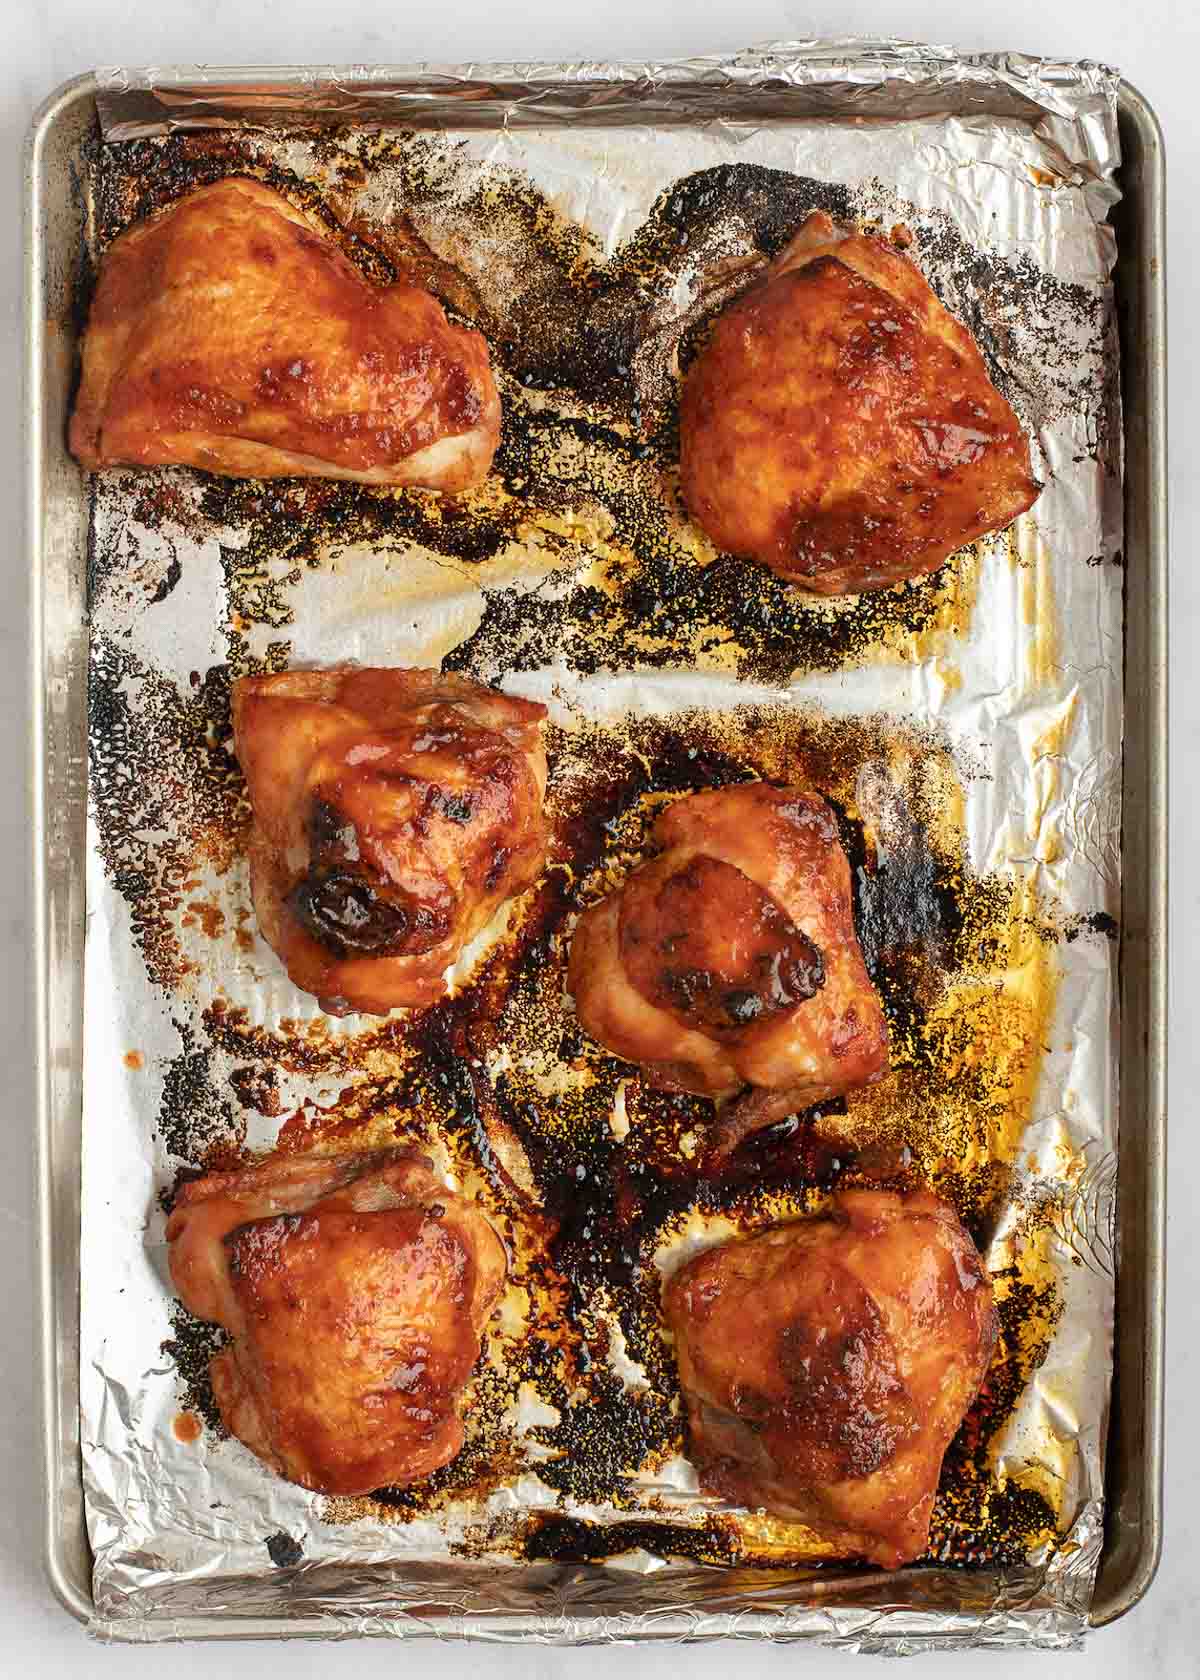 baked chicken thighs with homemade bbq sauce on an aluminum foil lined baking sheet